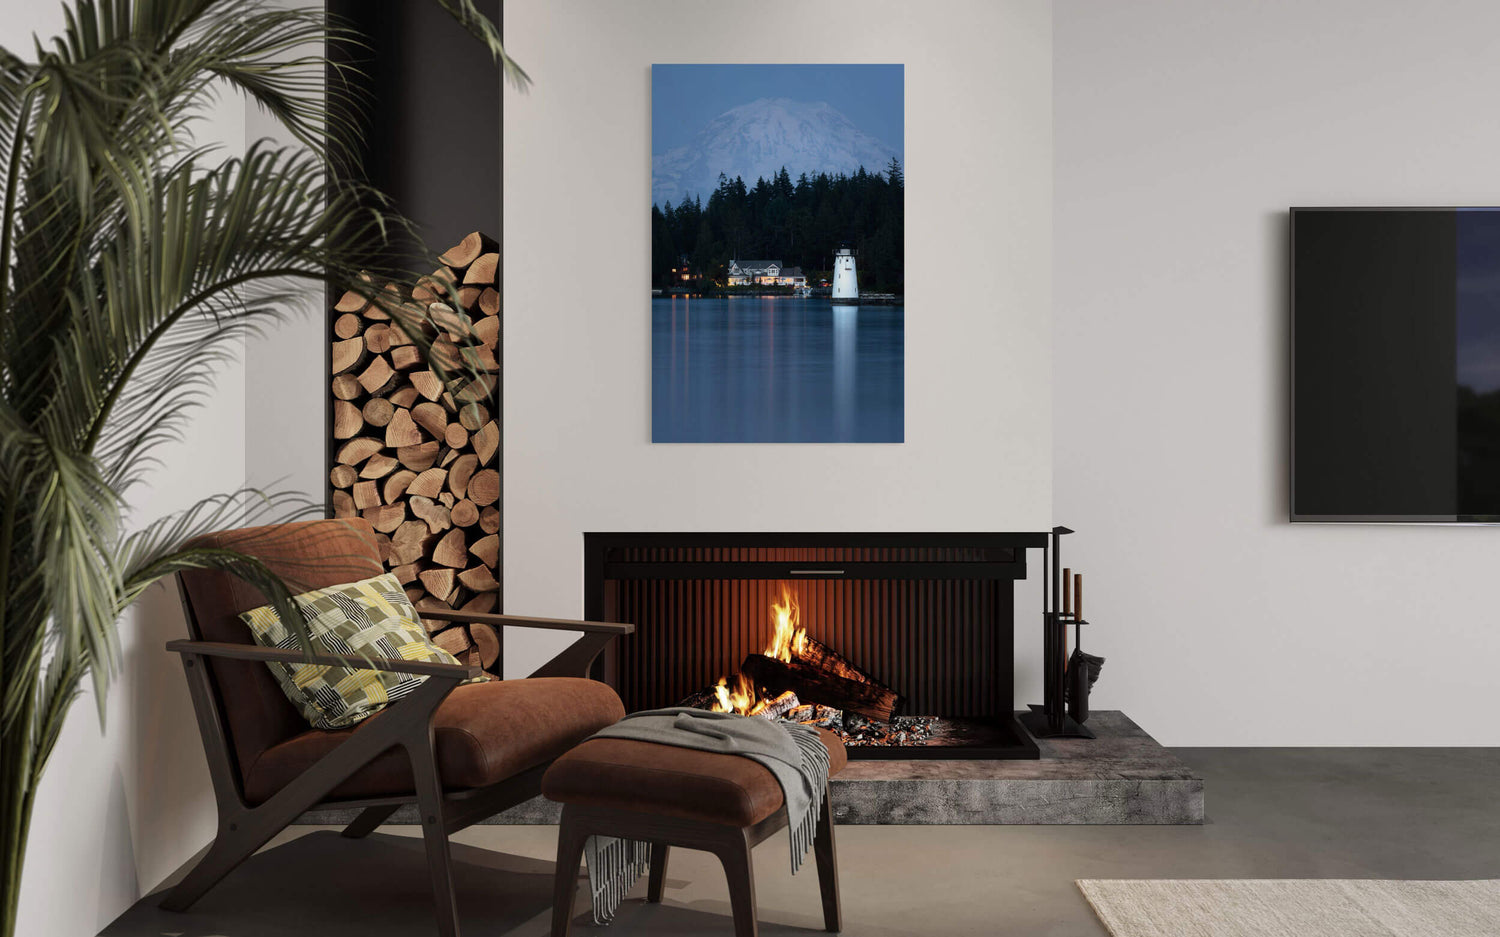 A Fox Island Lighthouse picture with Mount Rainier in the background hangs in a living room.